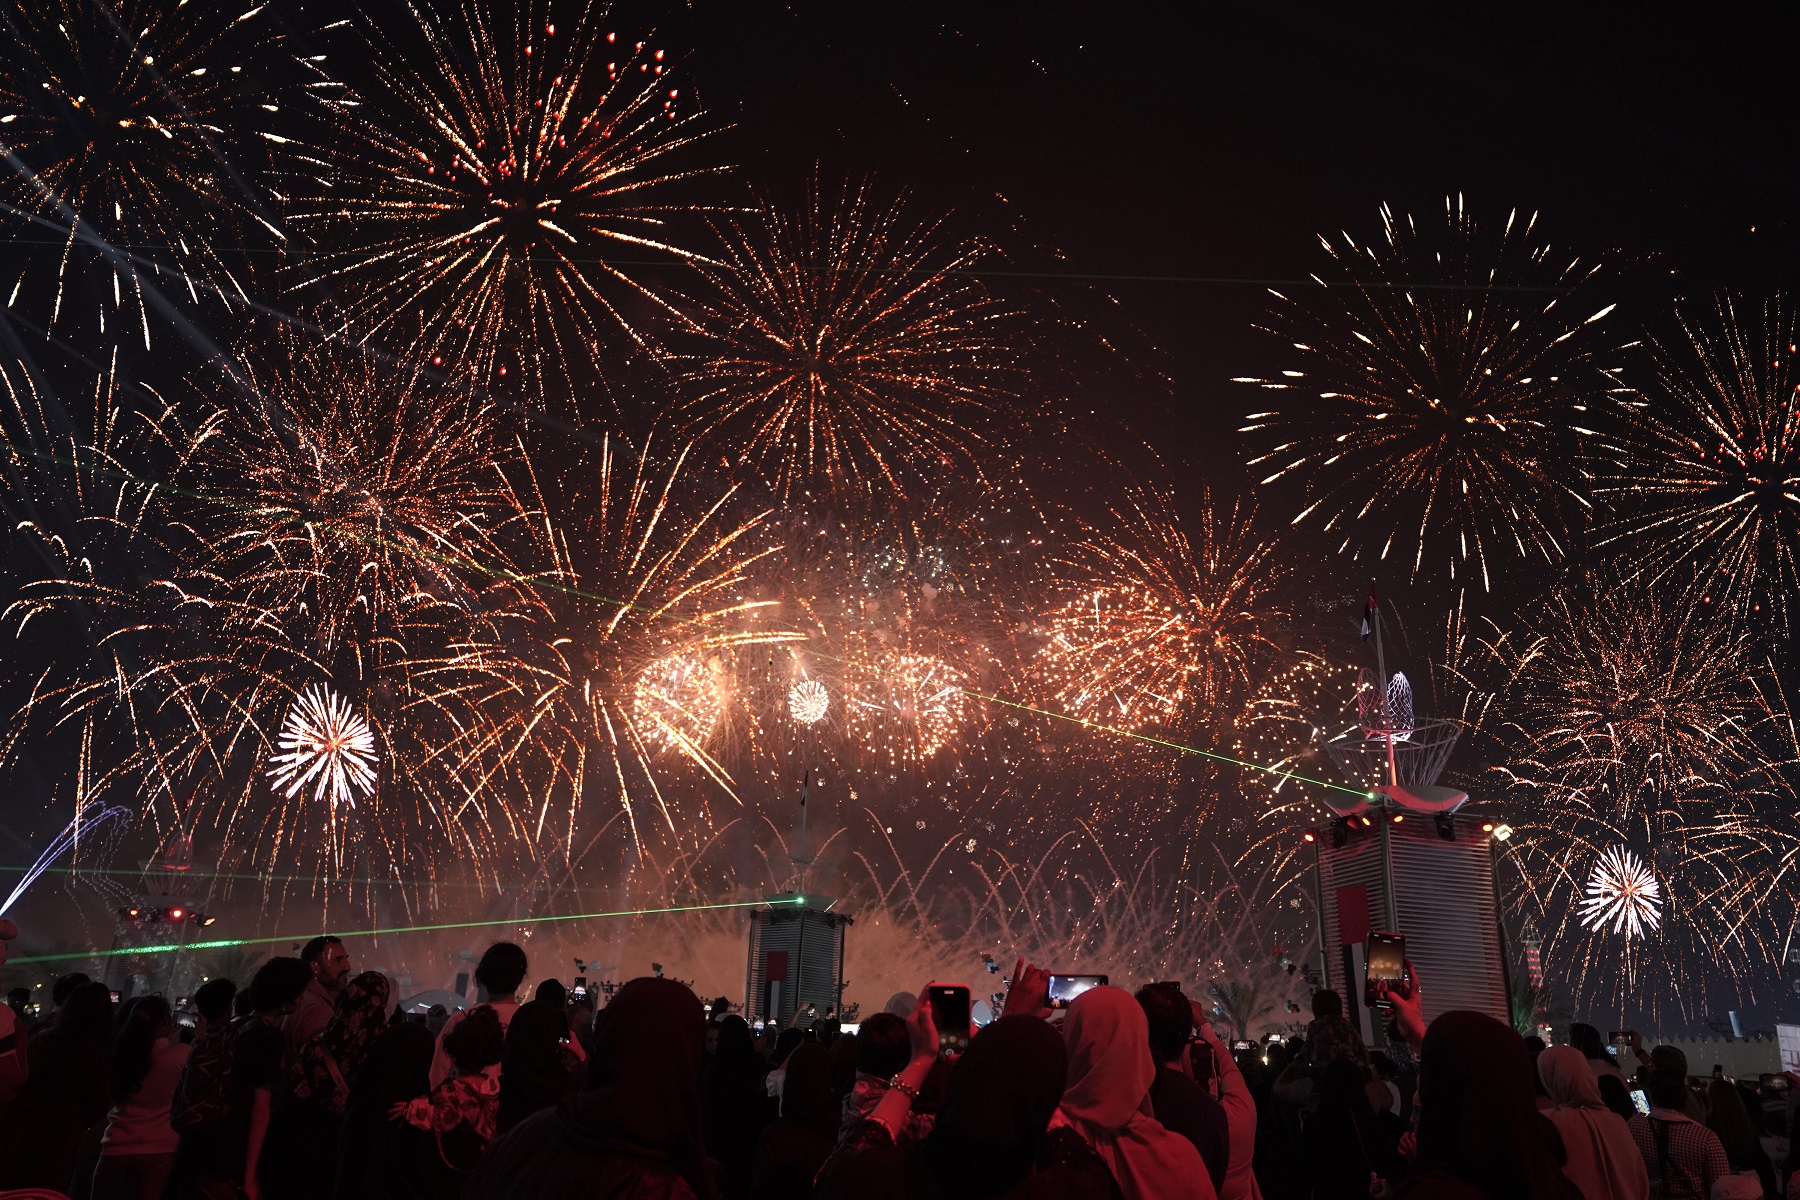 Sheikh Zayed Festival Lights Up The Sky With “Together For The Future”